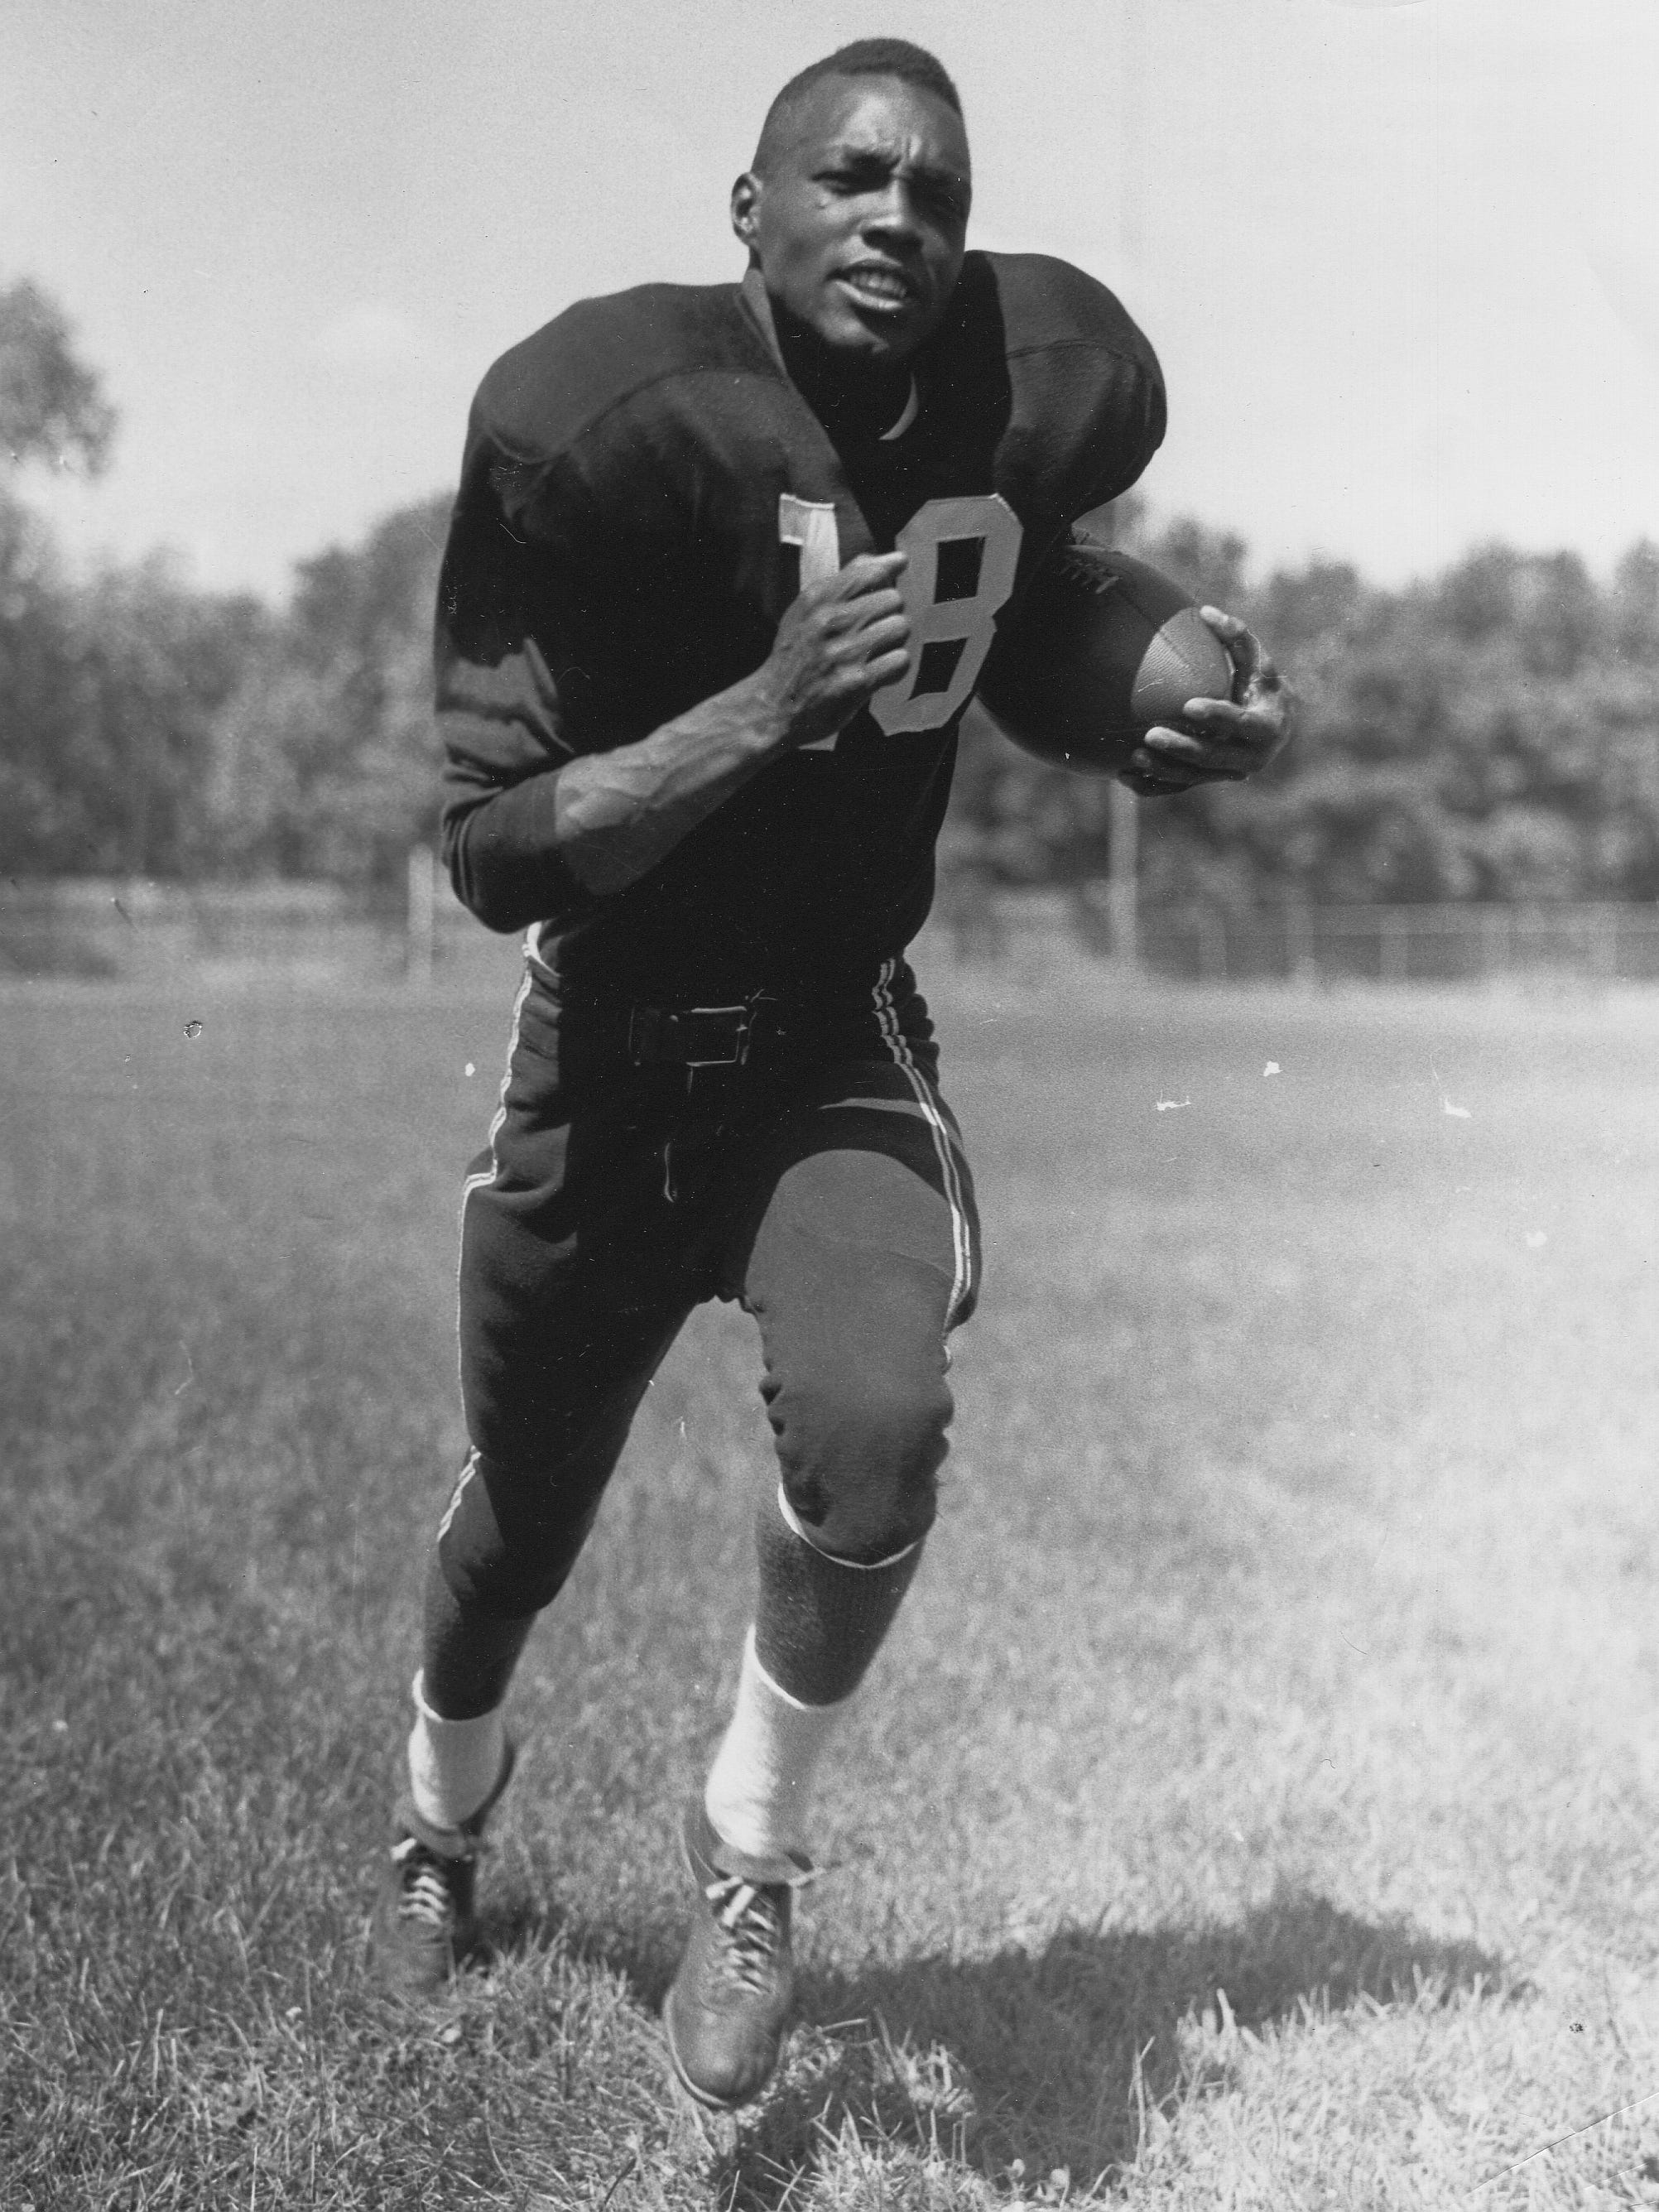 Wally Triplett wasn’t the first black player in the NFL or even on the Lions, who selected him in the 19th round in 1949. Nor was he the first black player drafted. But he was the first who bridged the two, becoming the first drafted black player to play in the NFL.